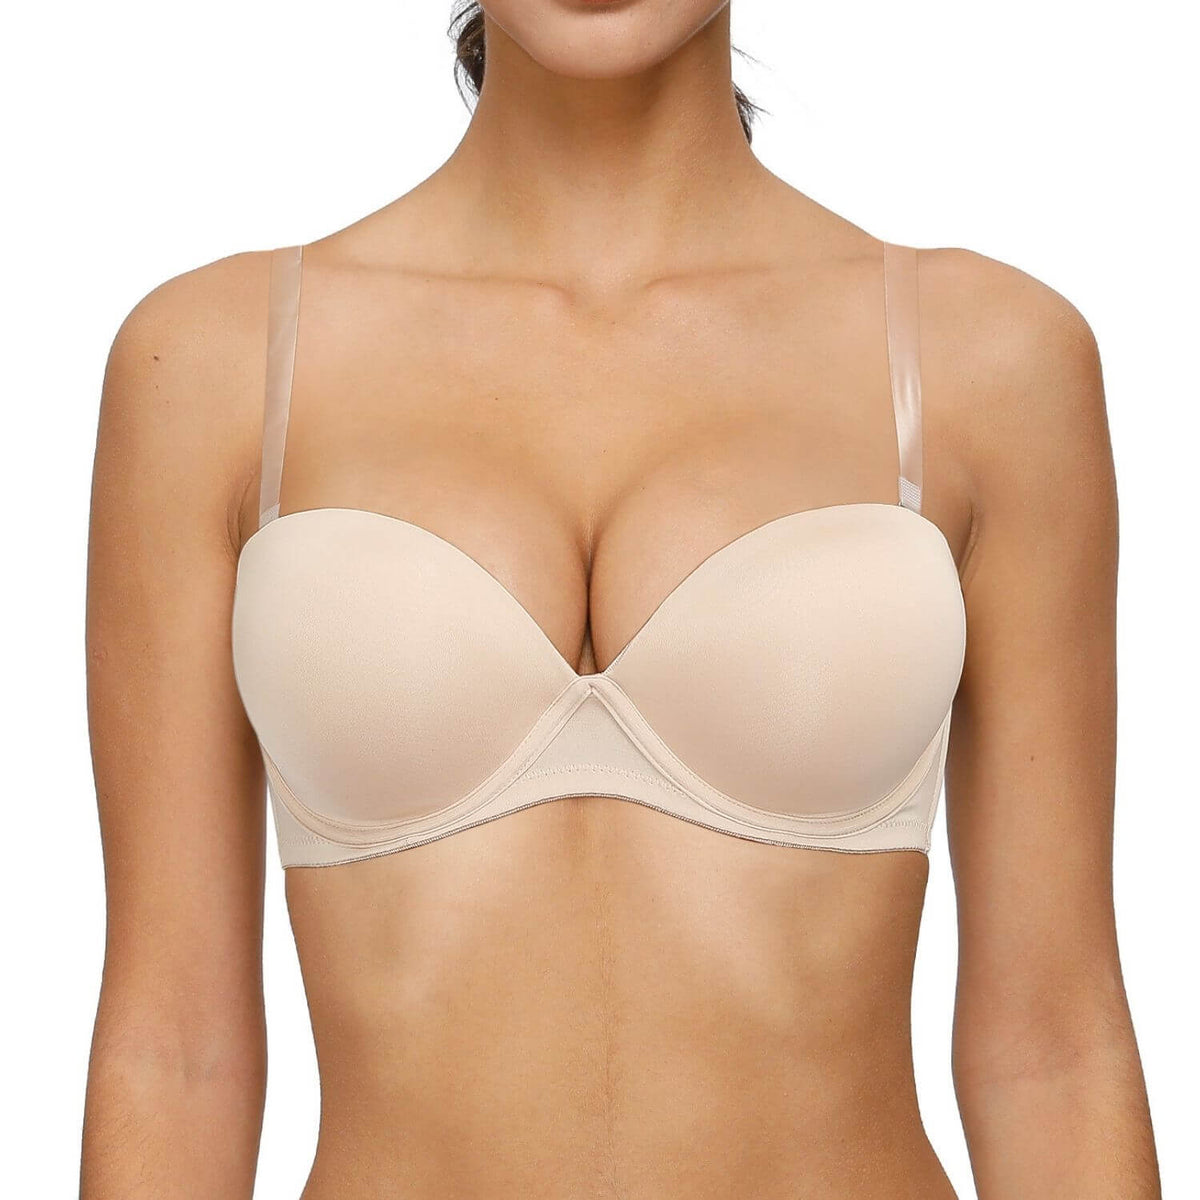 YANDW Front Closure Push Up Bra Strappy Thick Padded Cross Back Add 2 Cup  Plunge Seamless Underwire Bras White,32C